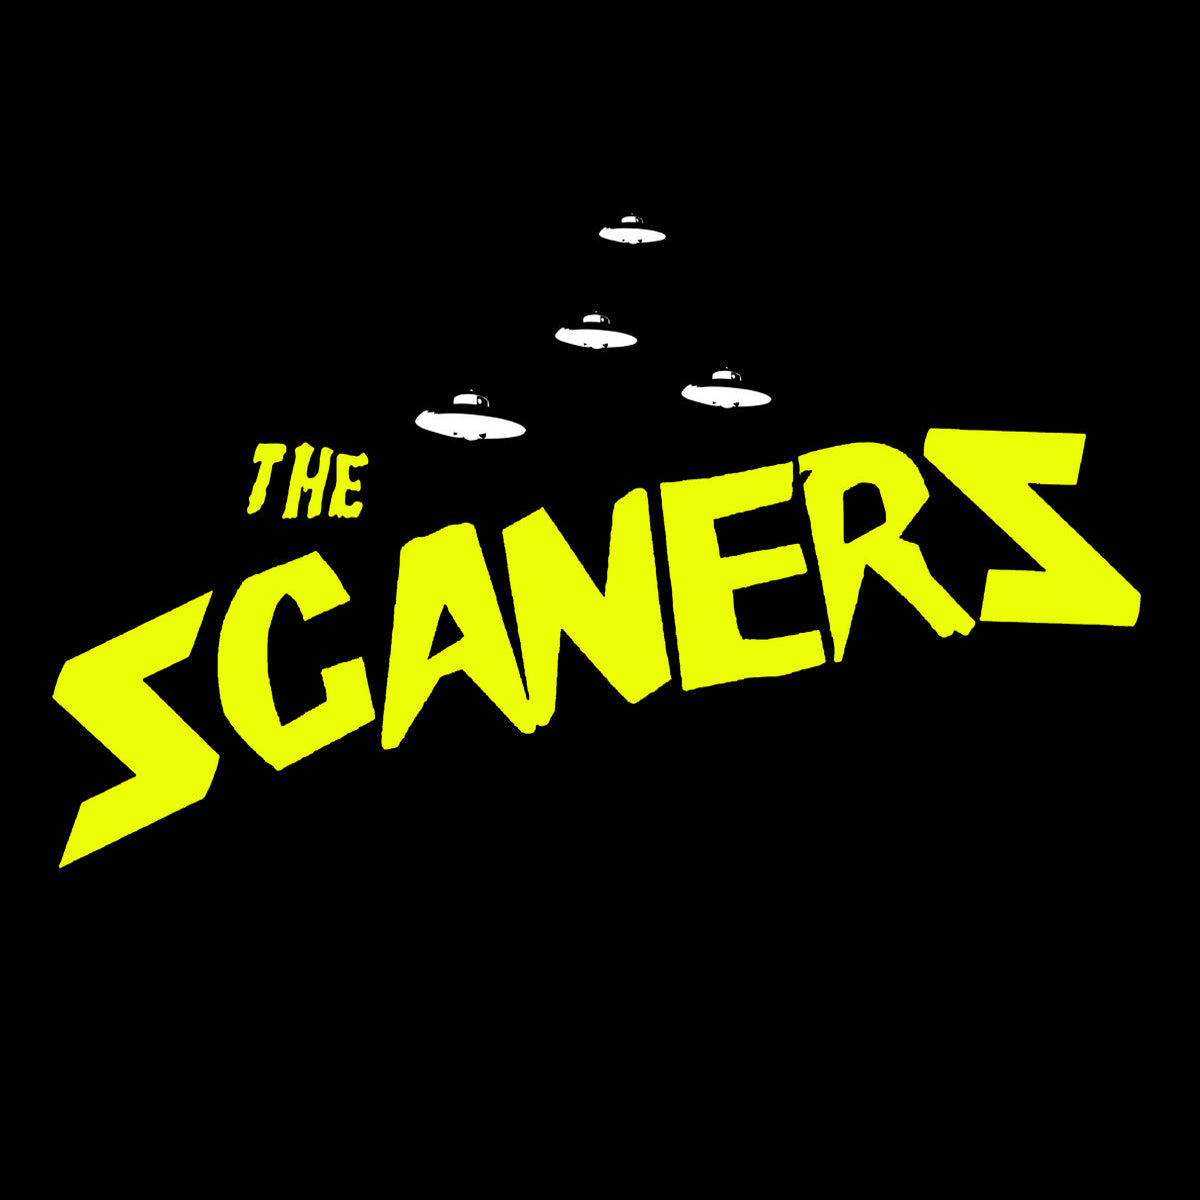 Scaners- S/T LP ~RARE FIRST PRESS ON YELLOW WAX / SCREAMERS!